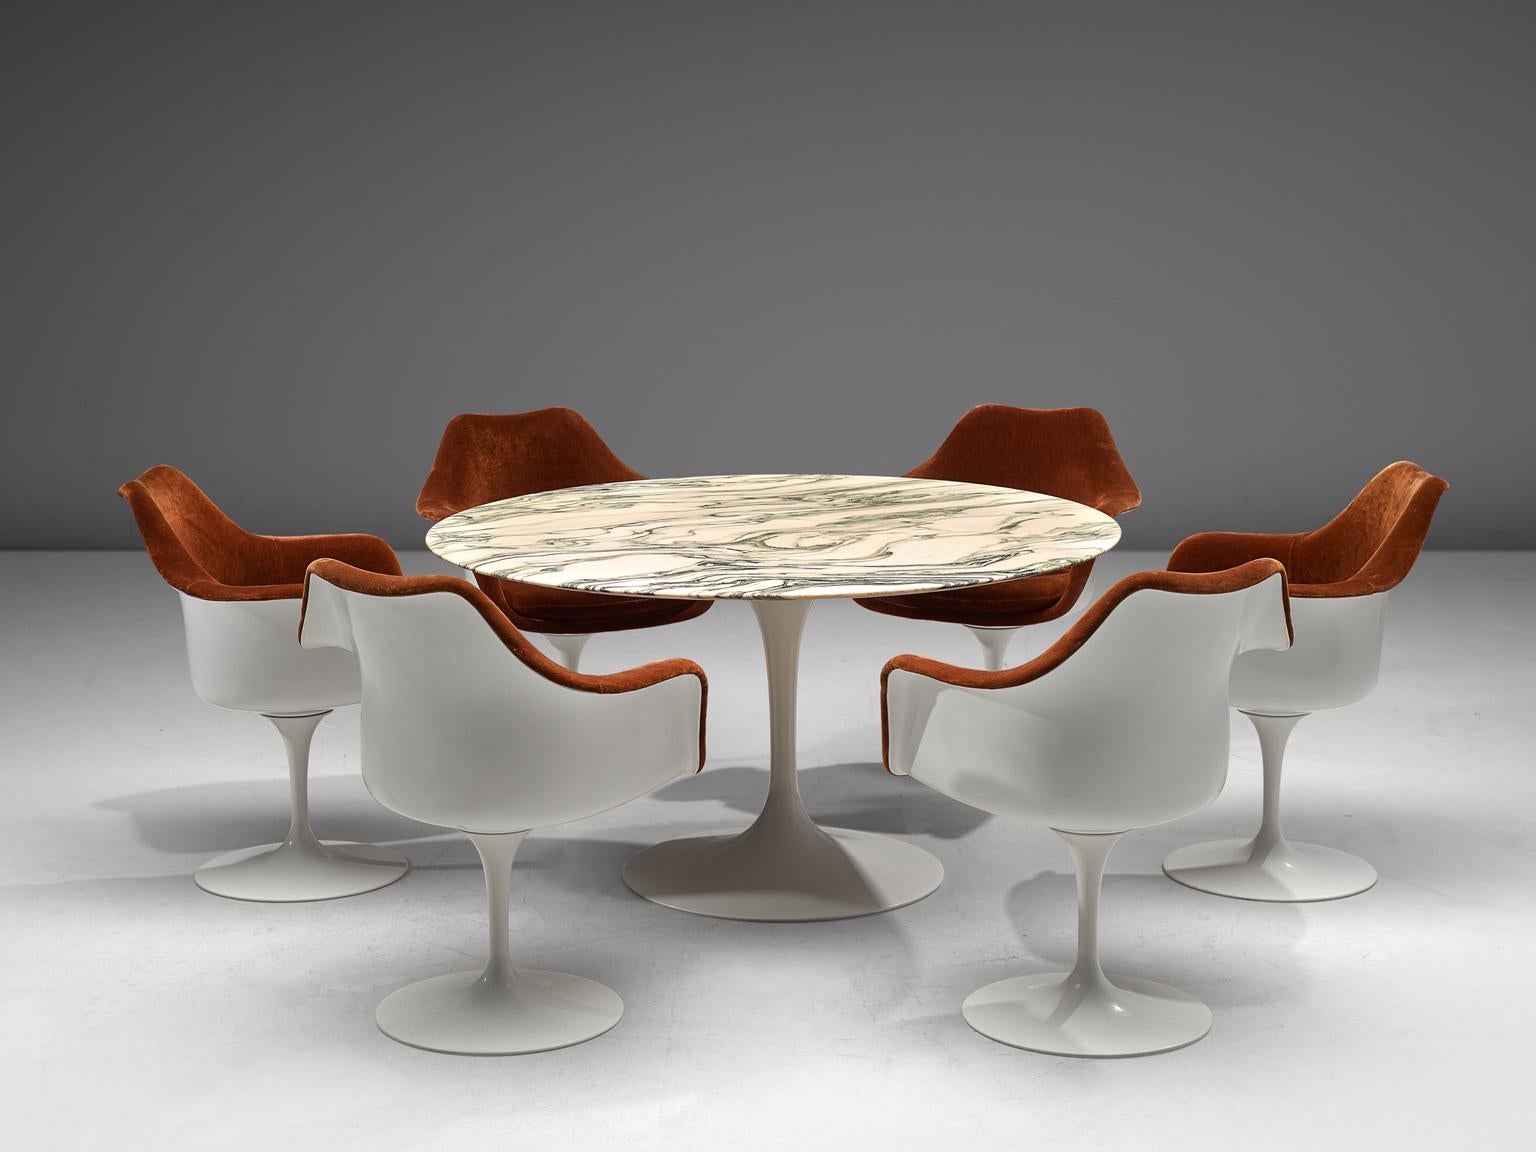 Eero Saarinen for Knoll International, dining set, metal, fiberglass, velvet and marble, United States, 1950s.

This dining table with six armchairs from the Tulip collection are designed by Eero Saarinen for Knoll International. This series is